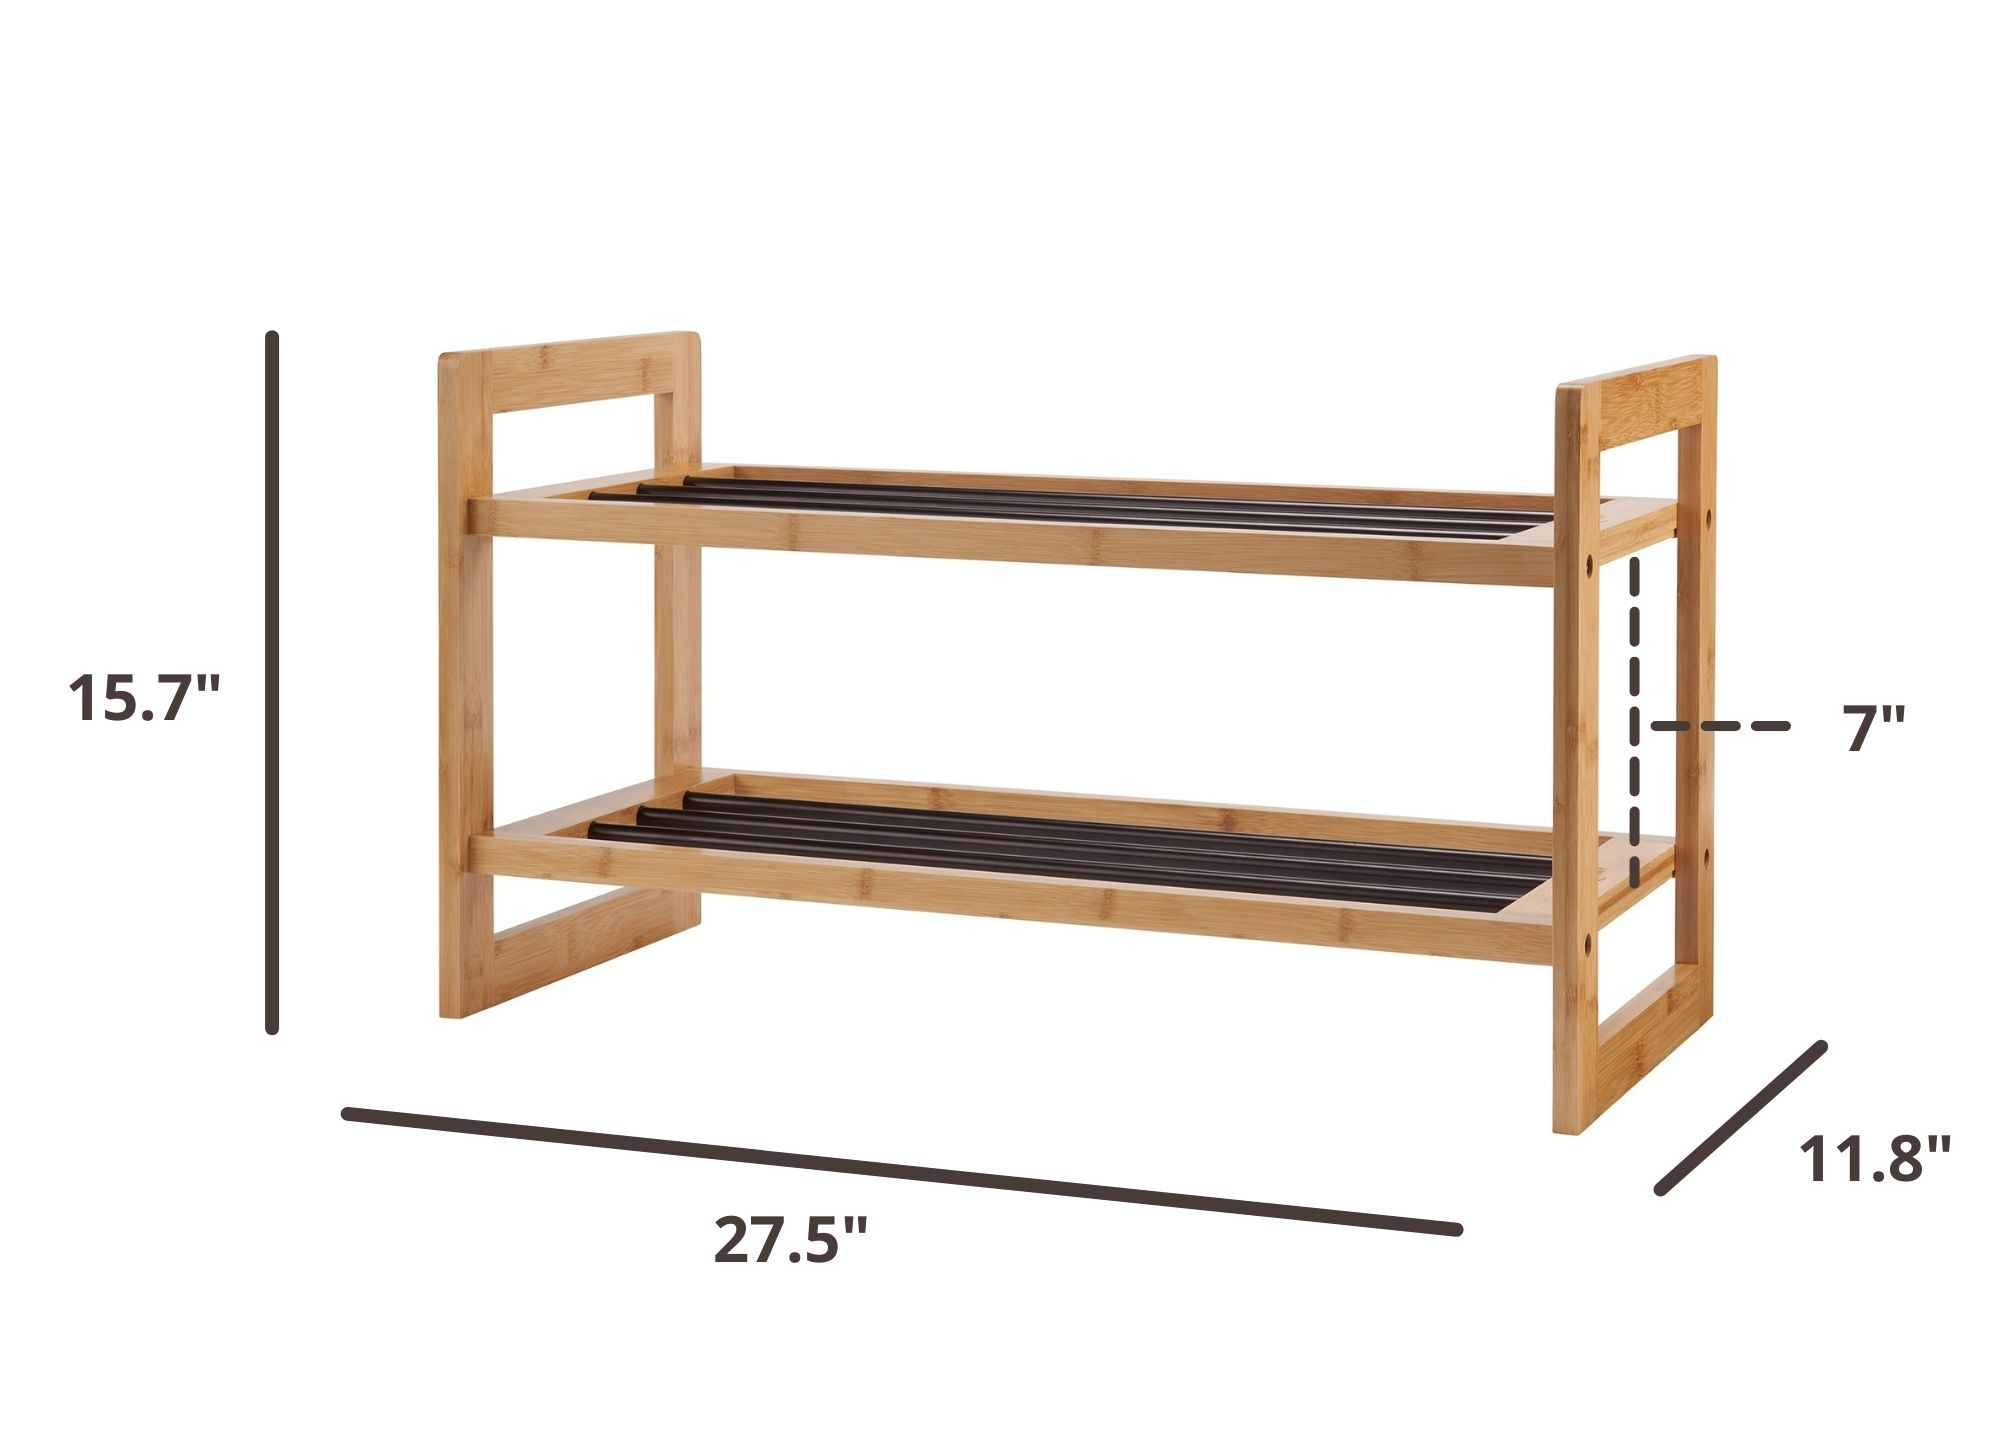 15.7 inches tall by 27.5 inches wide by 11.8 inches deep shoe rack with 7 inches of space in between shelves